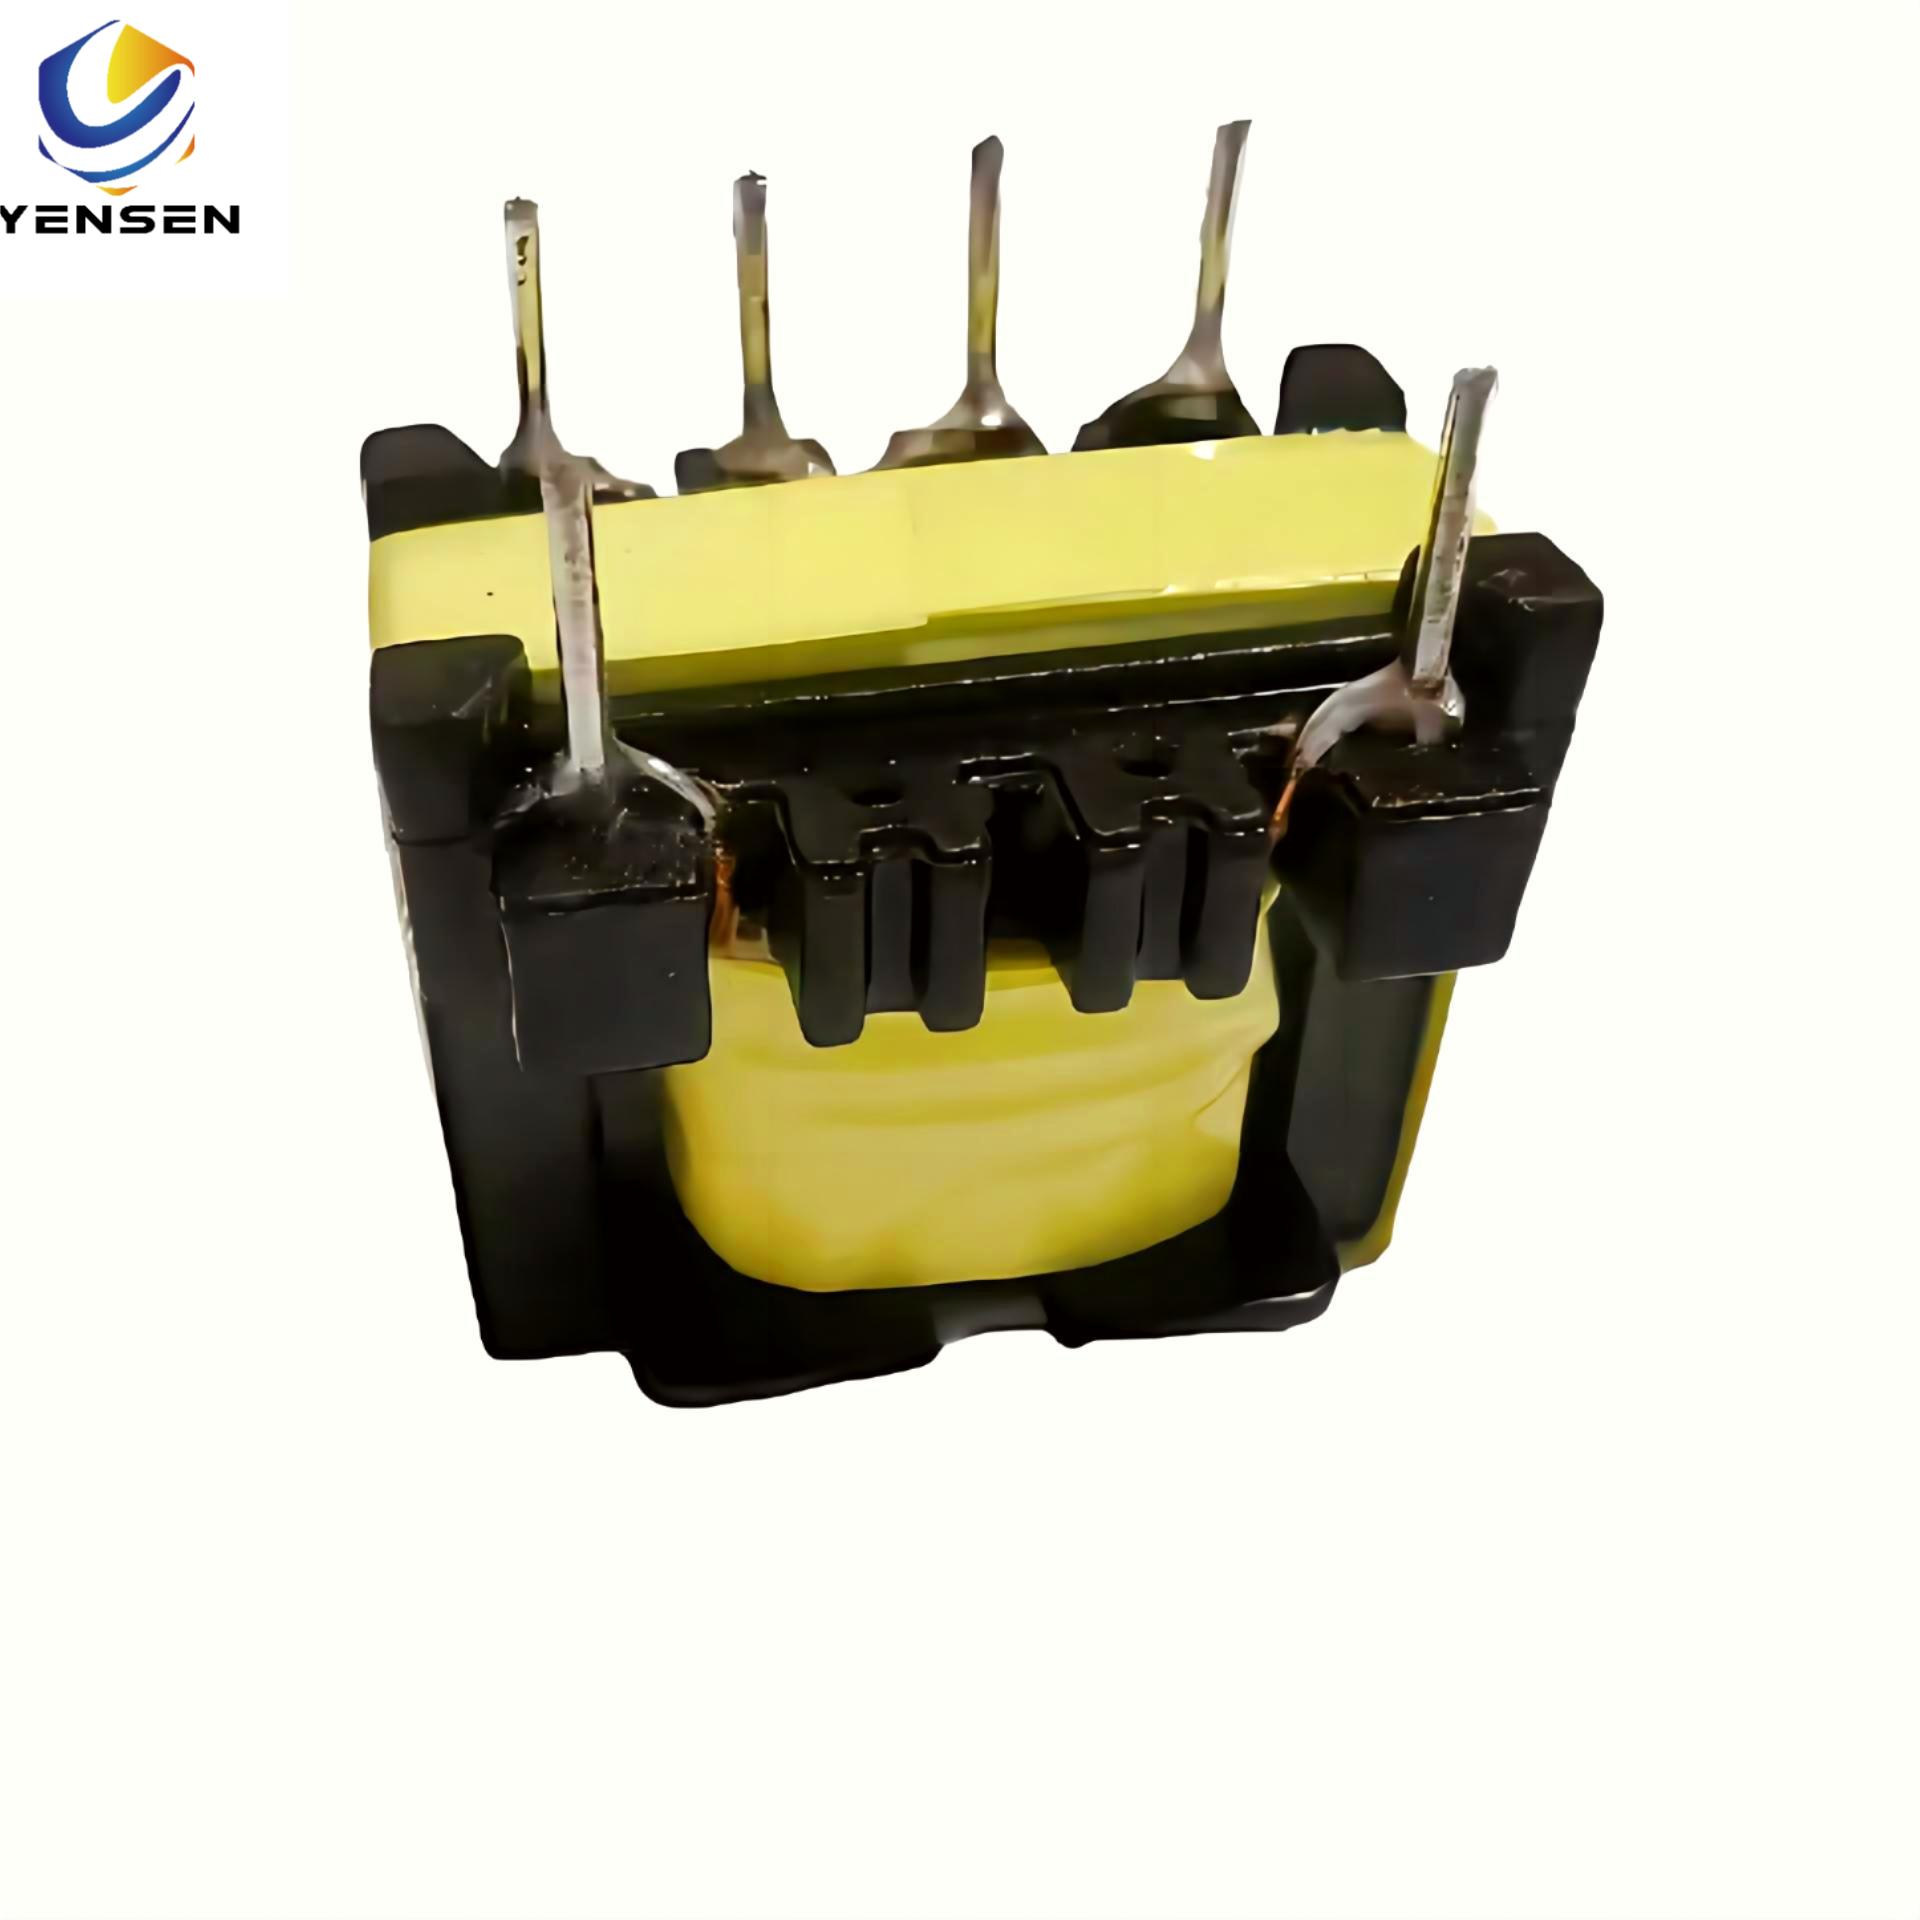 EE25 high frequency switching mode power transformer